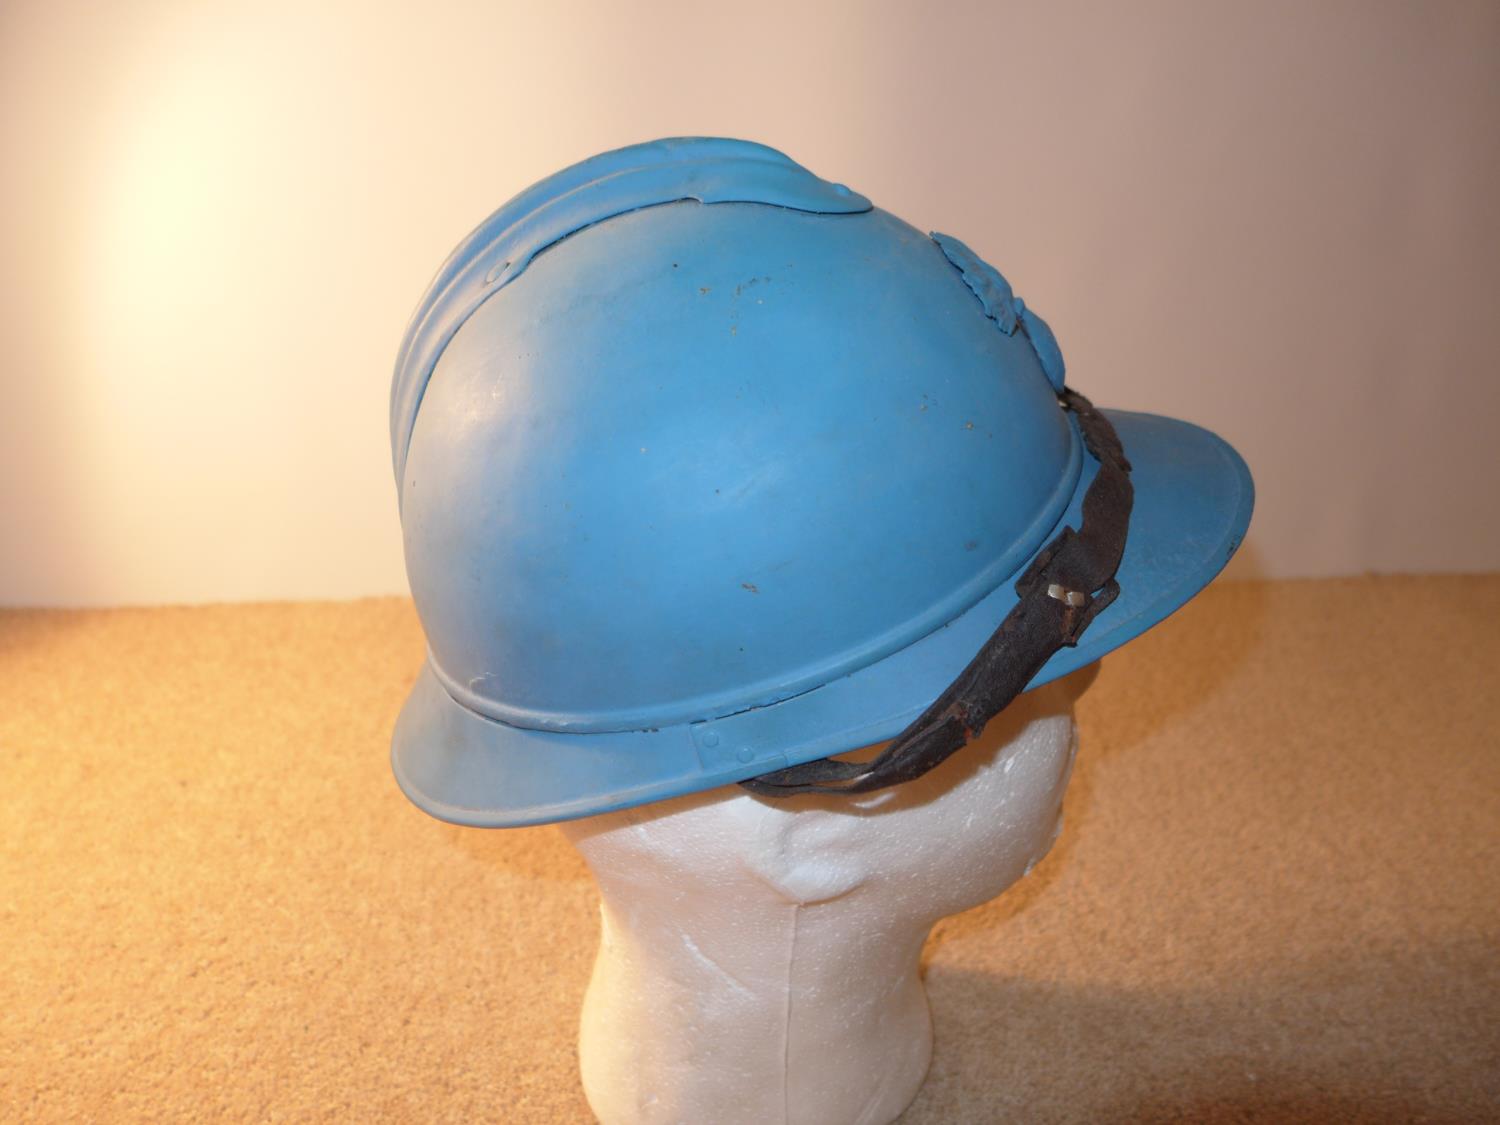 A BLUE PAINTED FRENCH ARMY ADRIAN HELMET WITH LEATHER LINING - Image 3 of 4